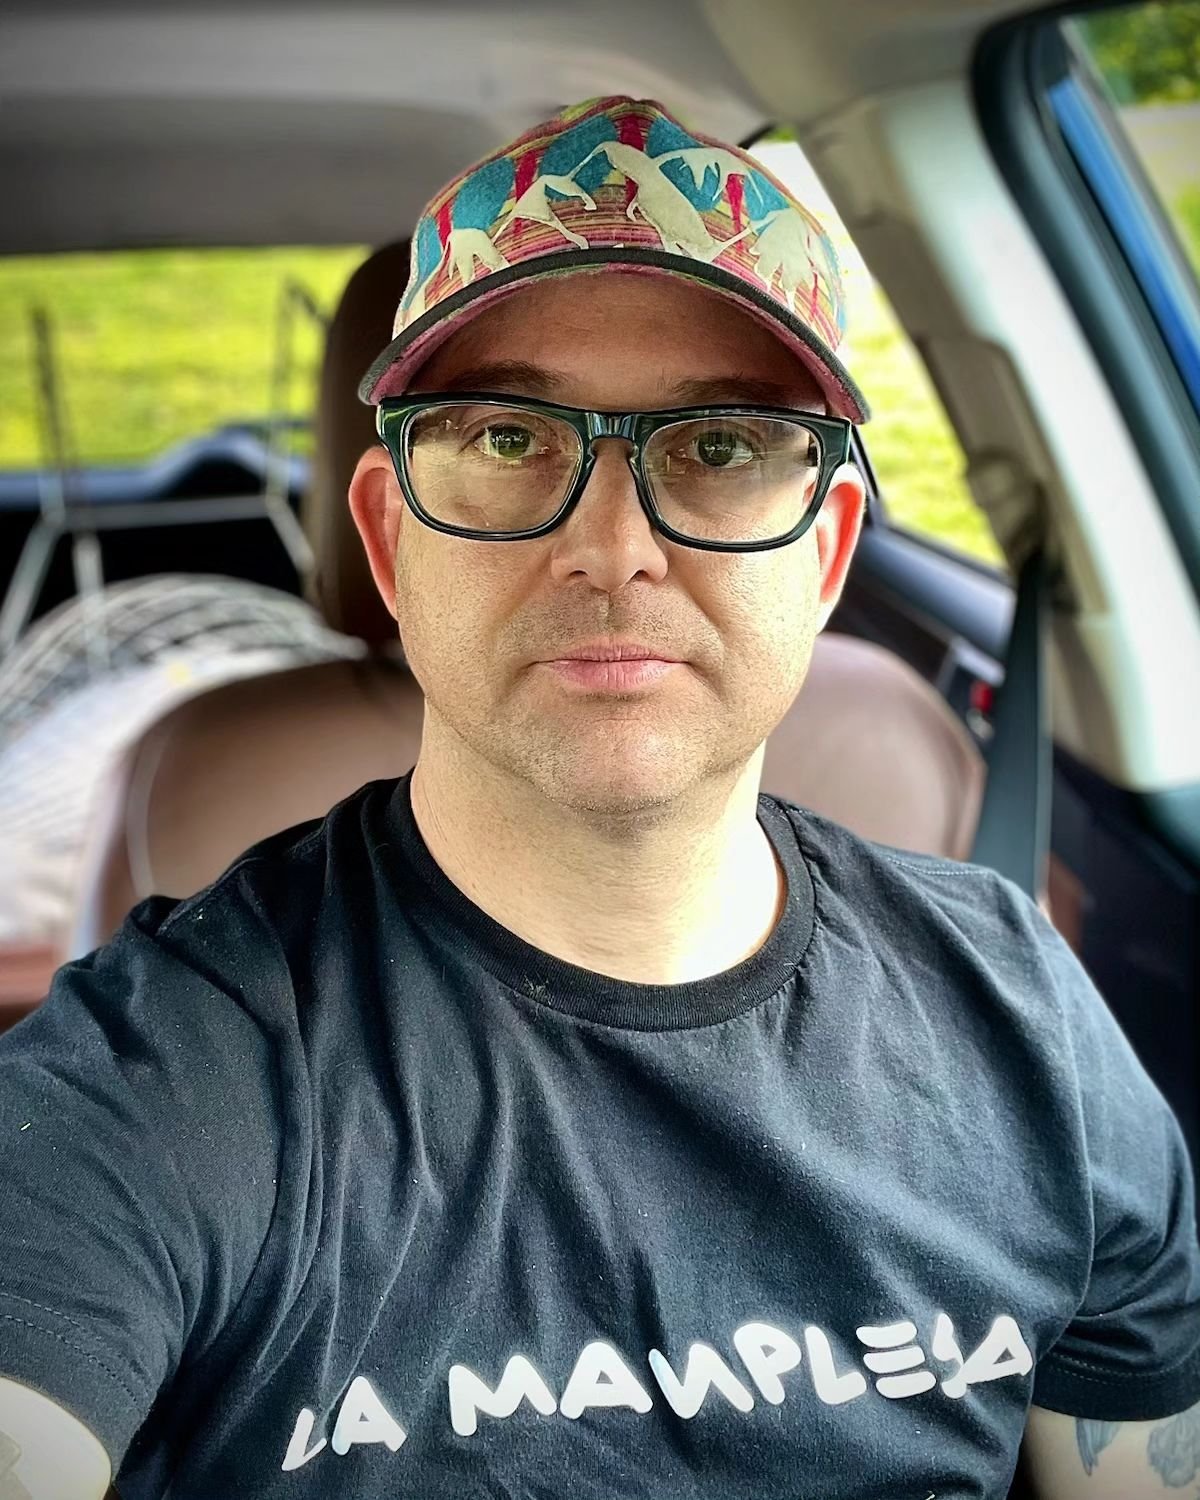 This guy knows what's up! 👕🔥

@jasonhamacher repping the new La Manplesa swag. Shirts will be available TOMORROW at our Cinco de Mayo release party at @donjuansdc from 4-6pm.

#TShirt #Swag #LaManplesa #MtPleasant #MtPleasantClubWhiskey #AgaveSpiri